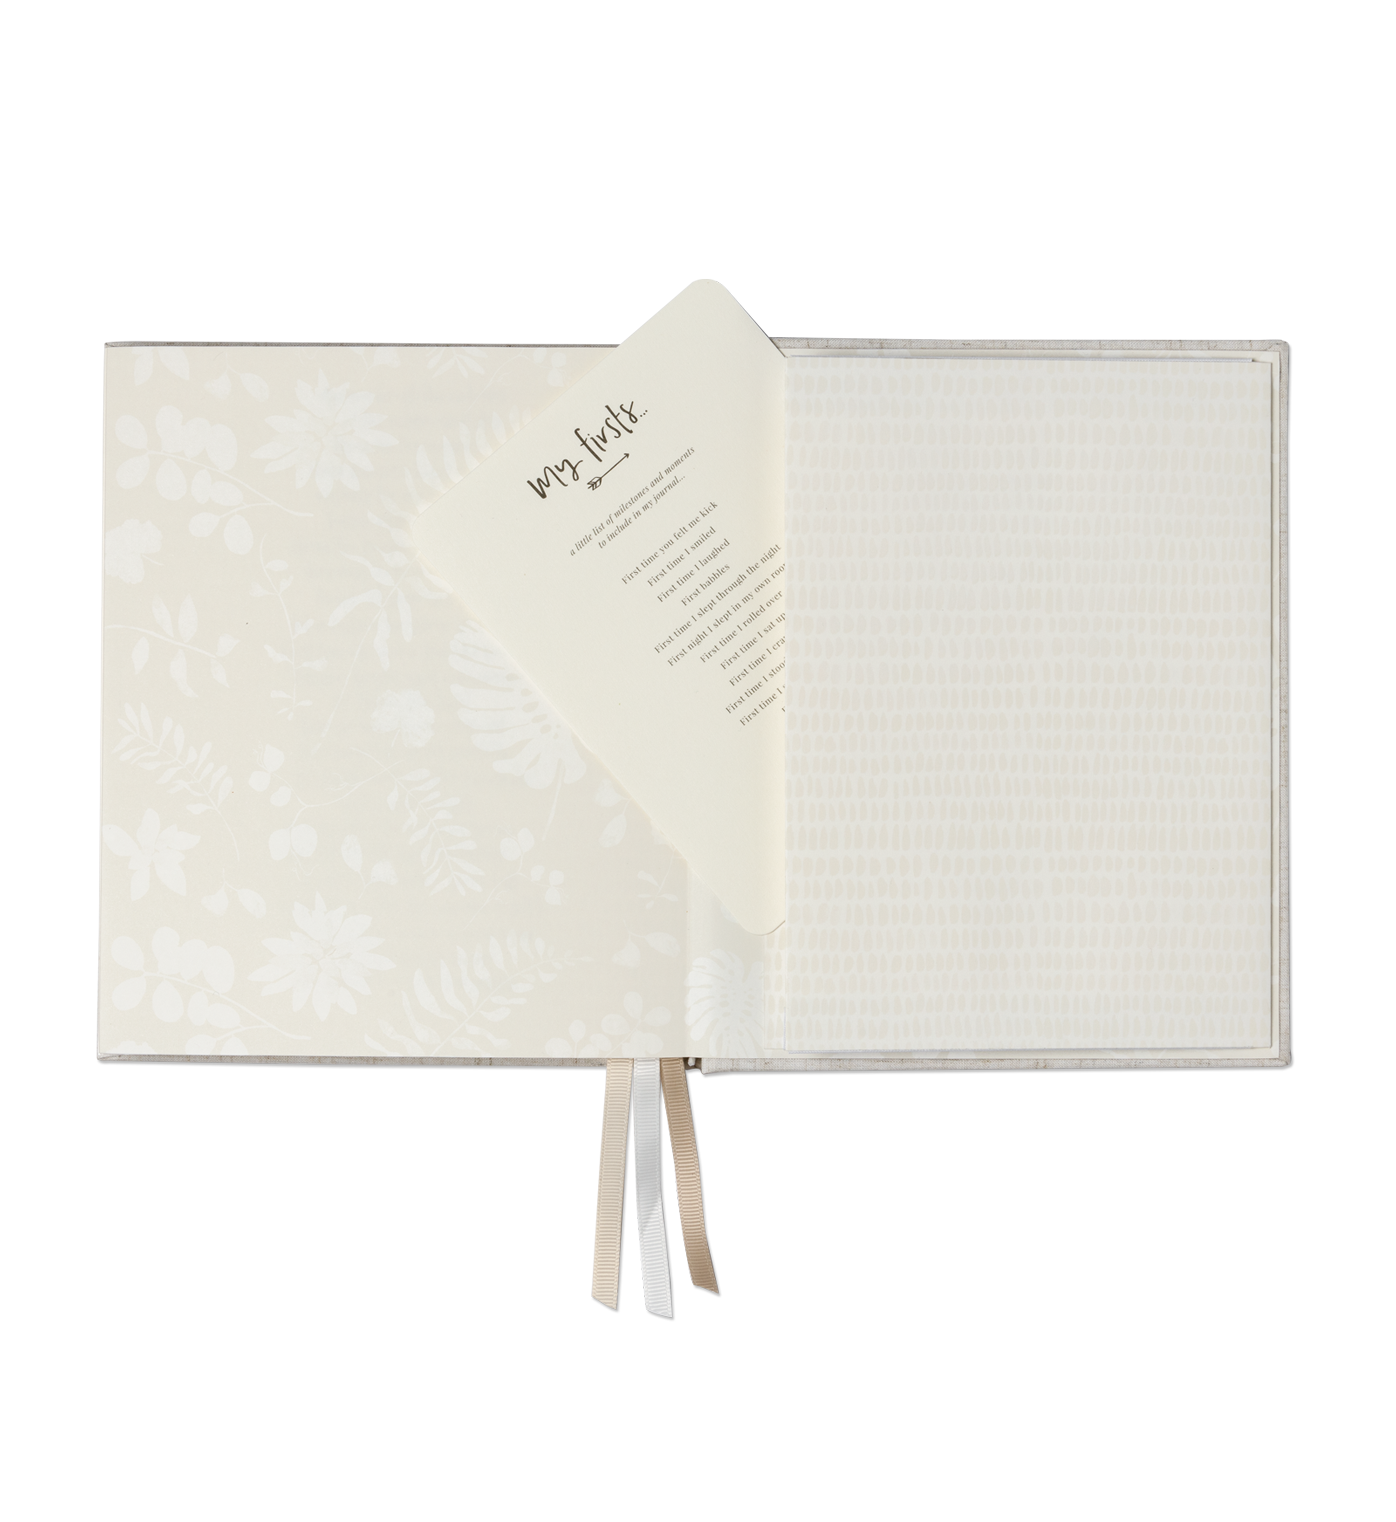 Open pages of the Emma Kate Co. little dreamer baby journal on a transparent surface.